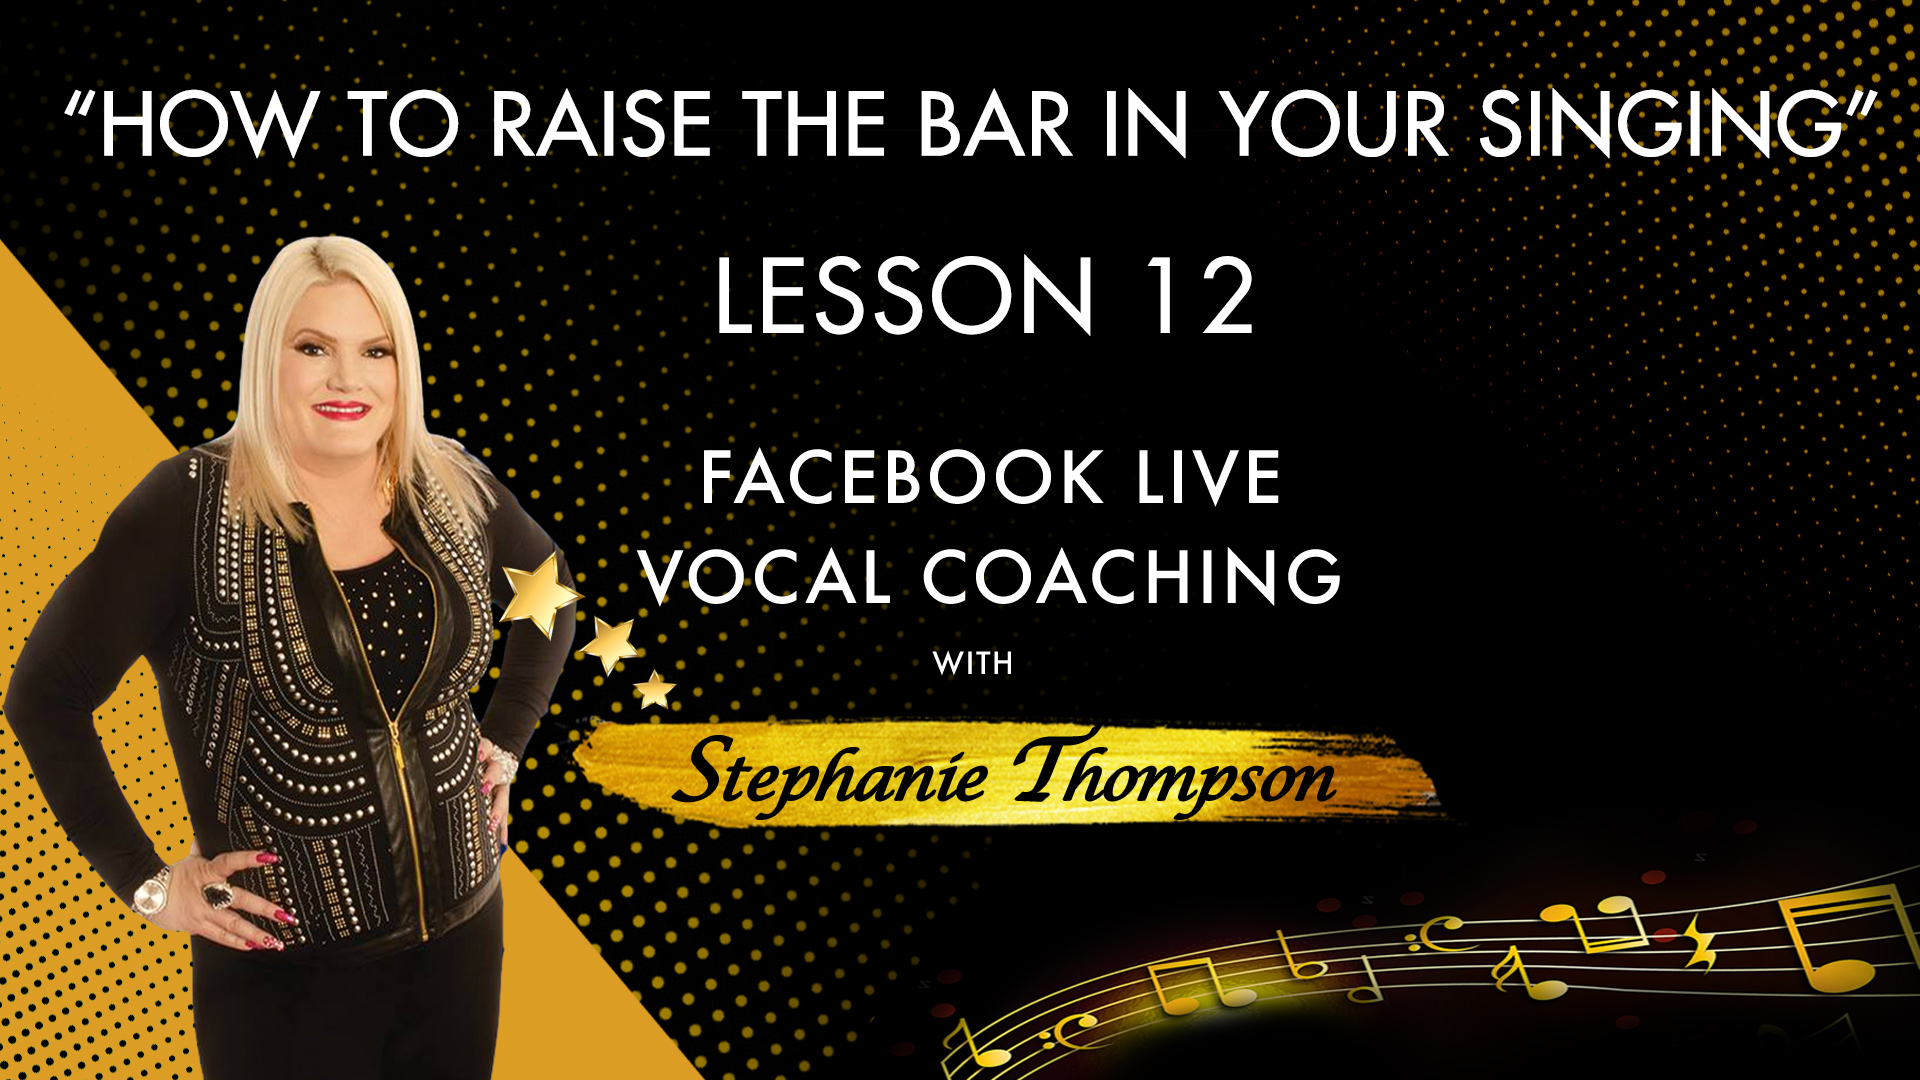 Lesson 12 - How to Raise The Bar In Your Singing